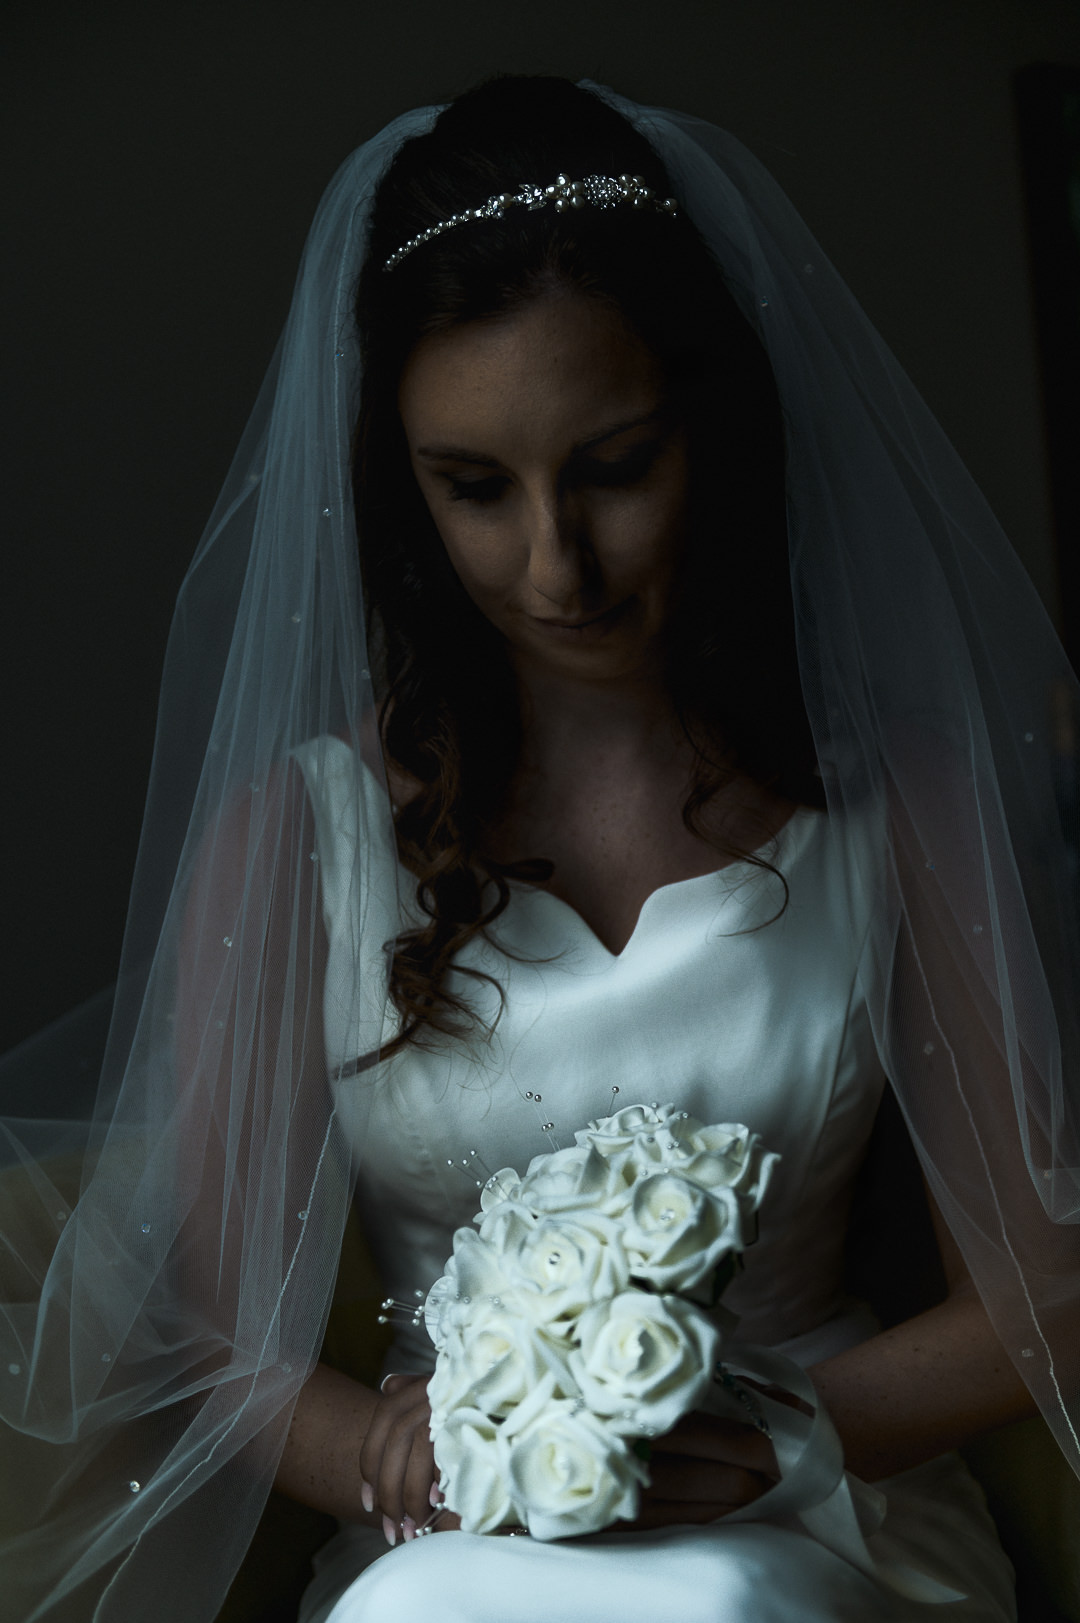 The bride is sitting and holding her flowers which are bright in the window light